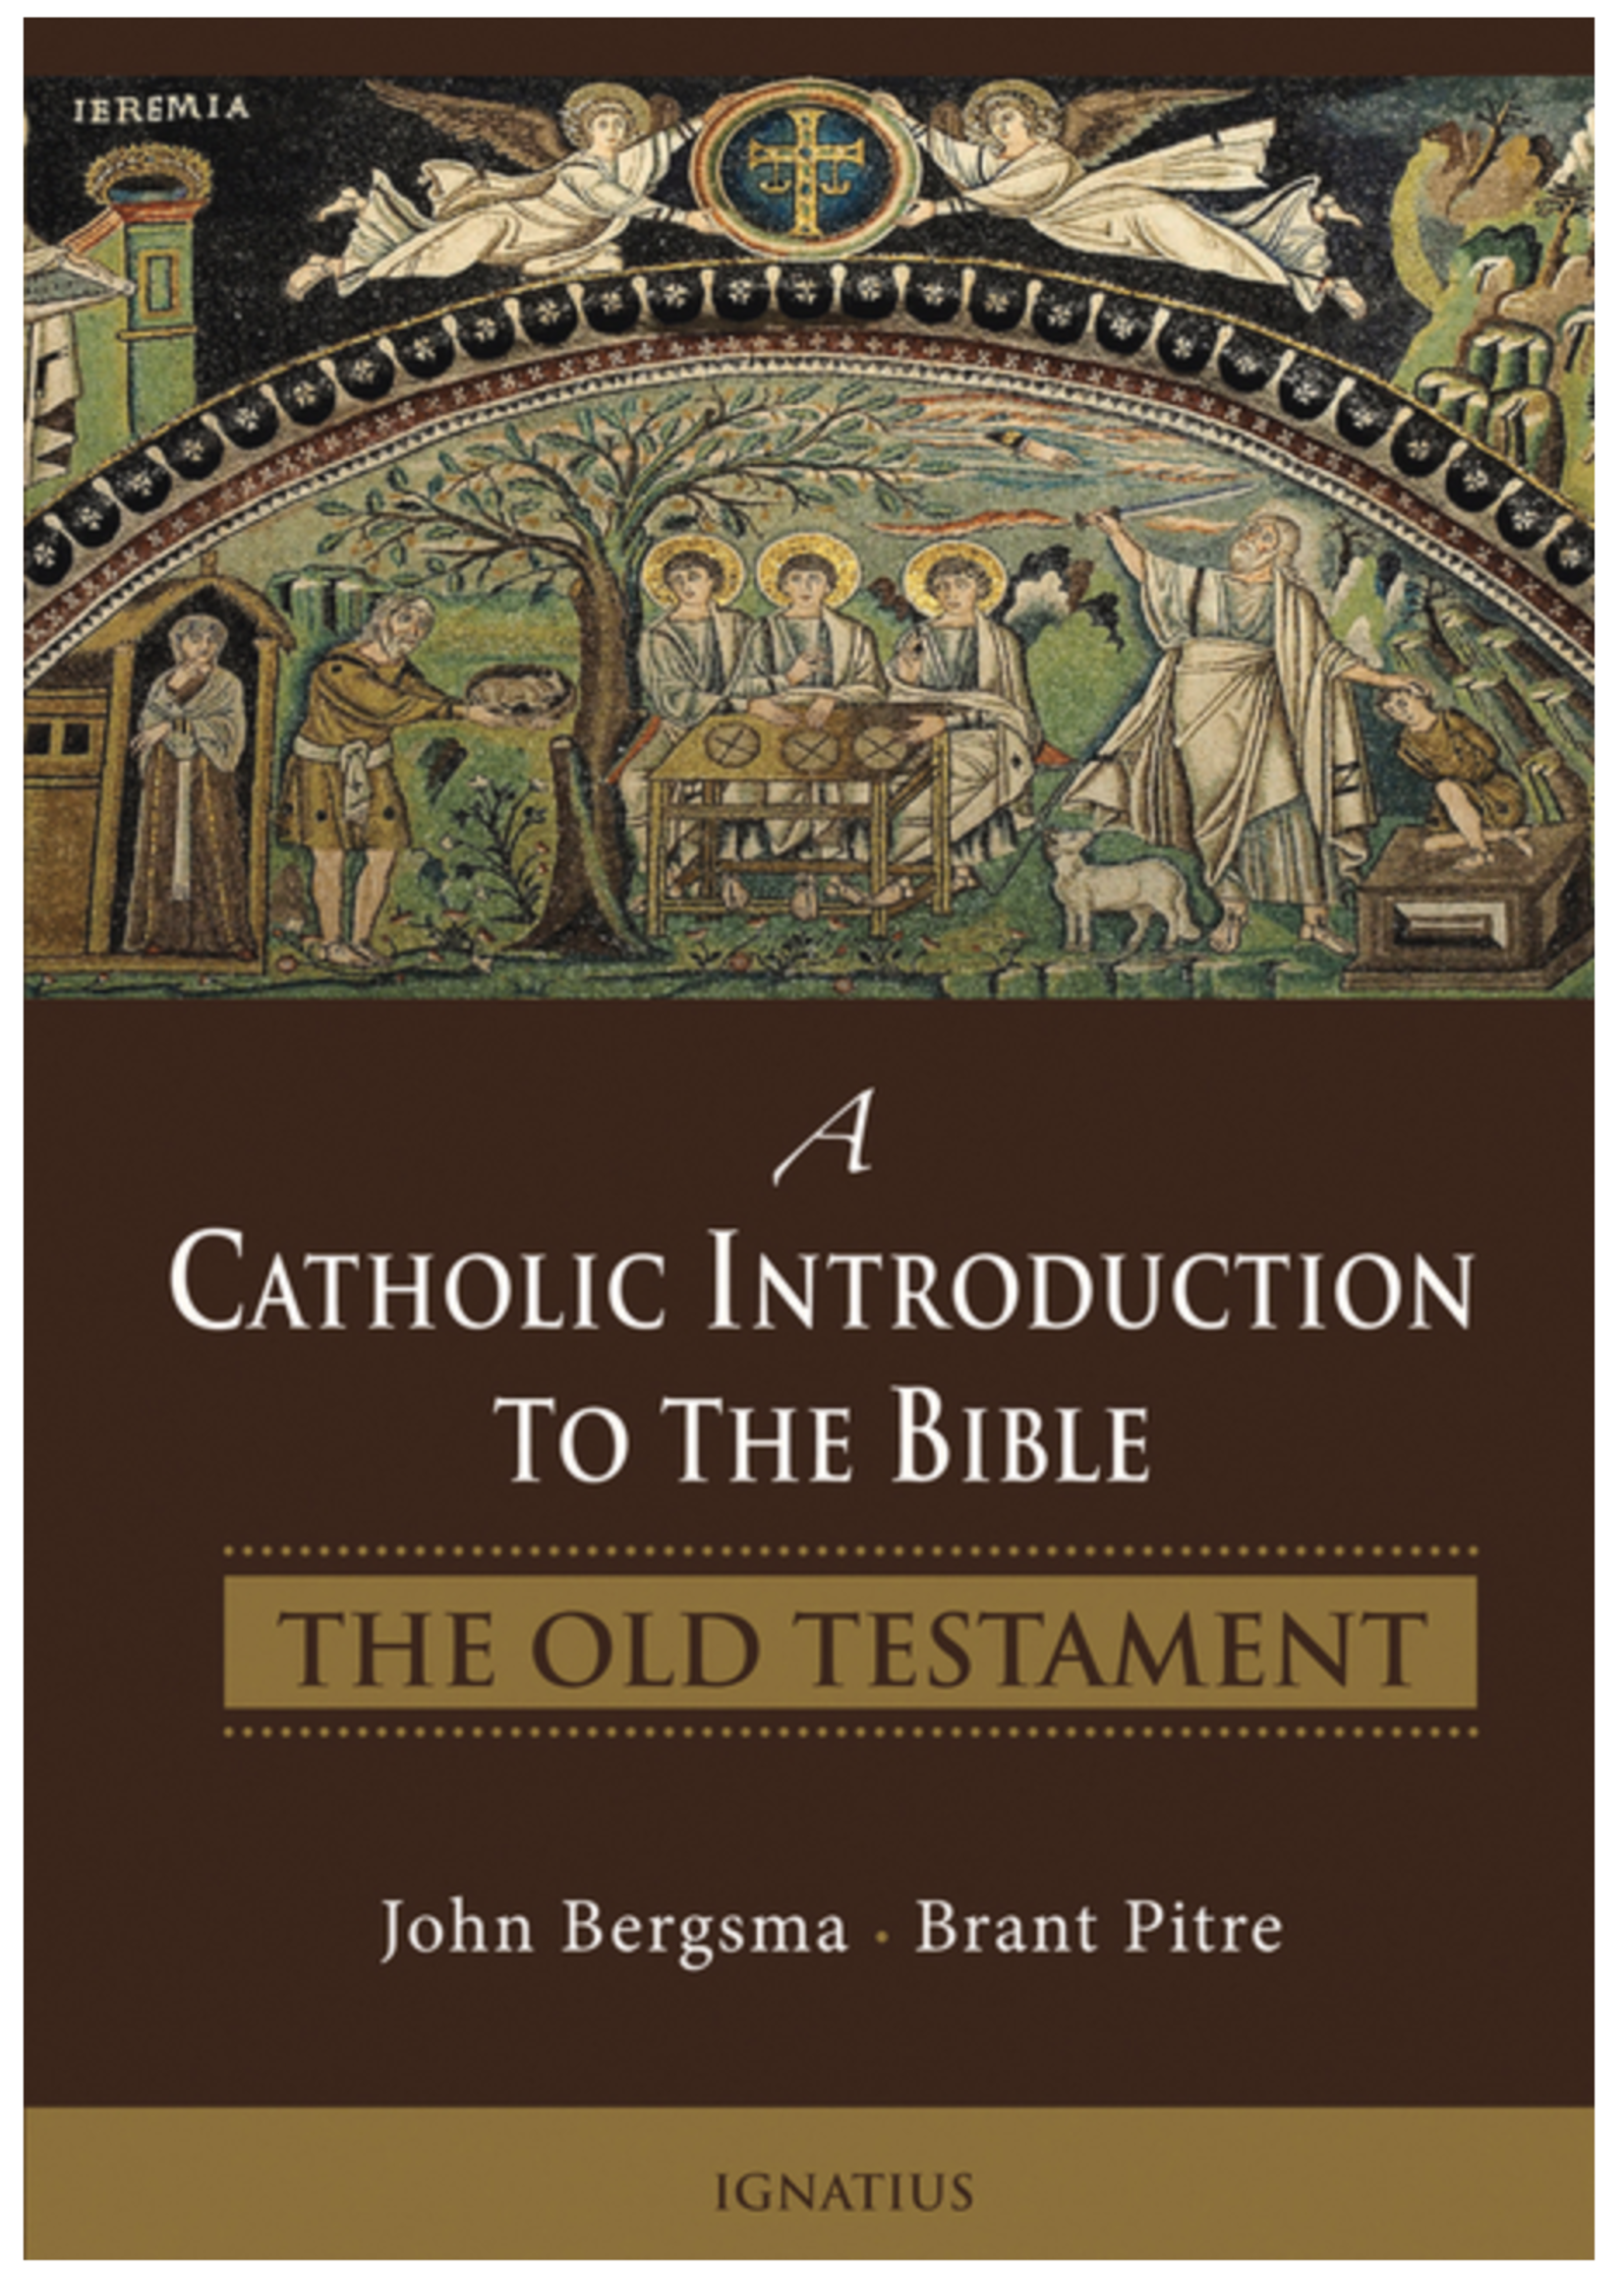 Catholic Introduction to the Bible: The Old Testament